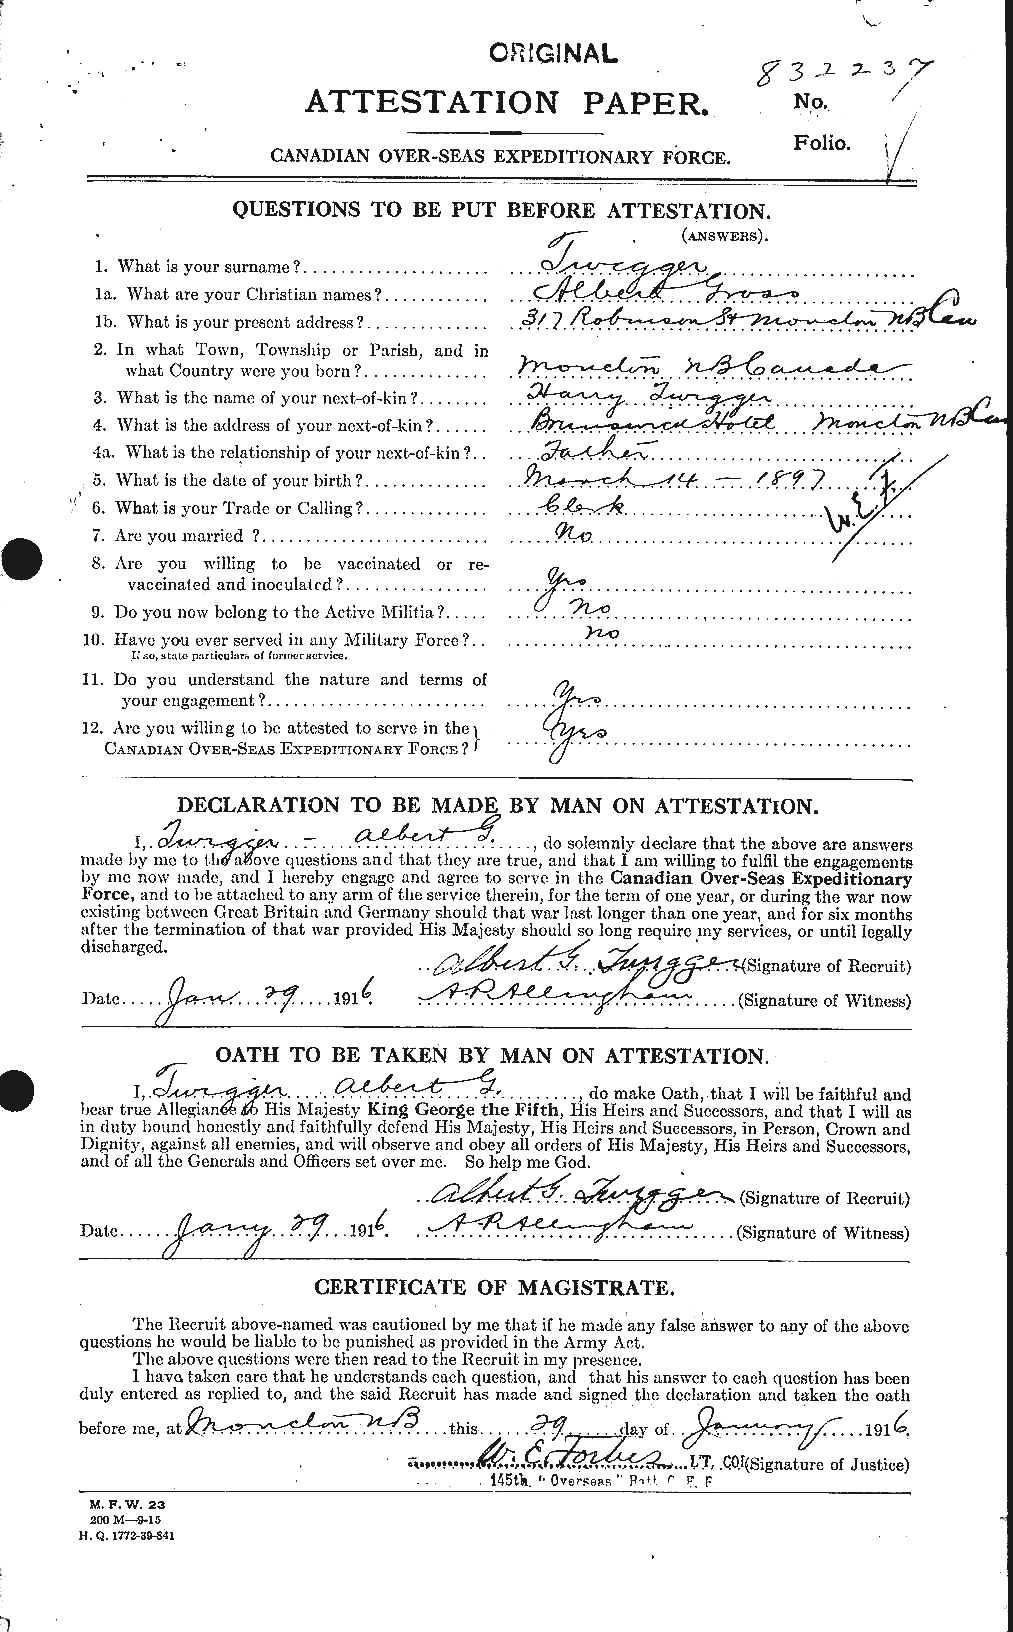 Personnel Records of the First World War - CEF 645559a